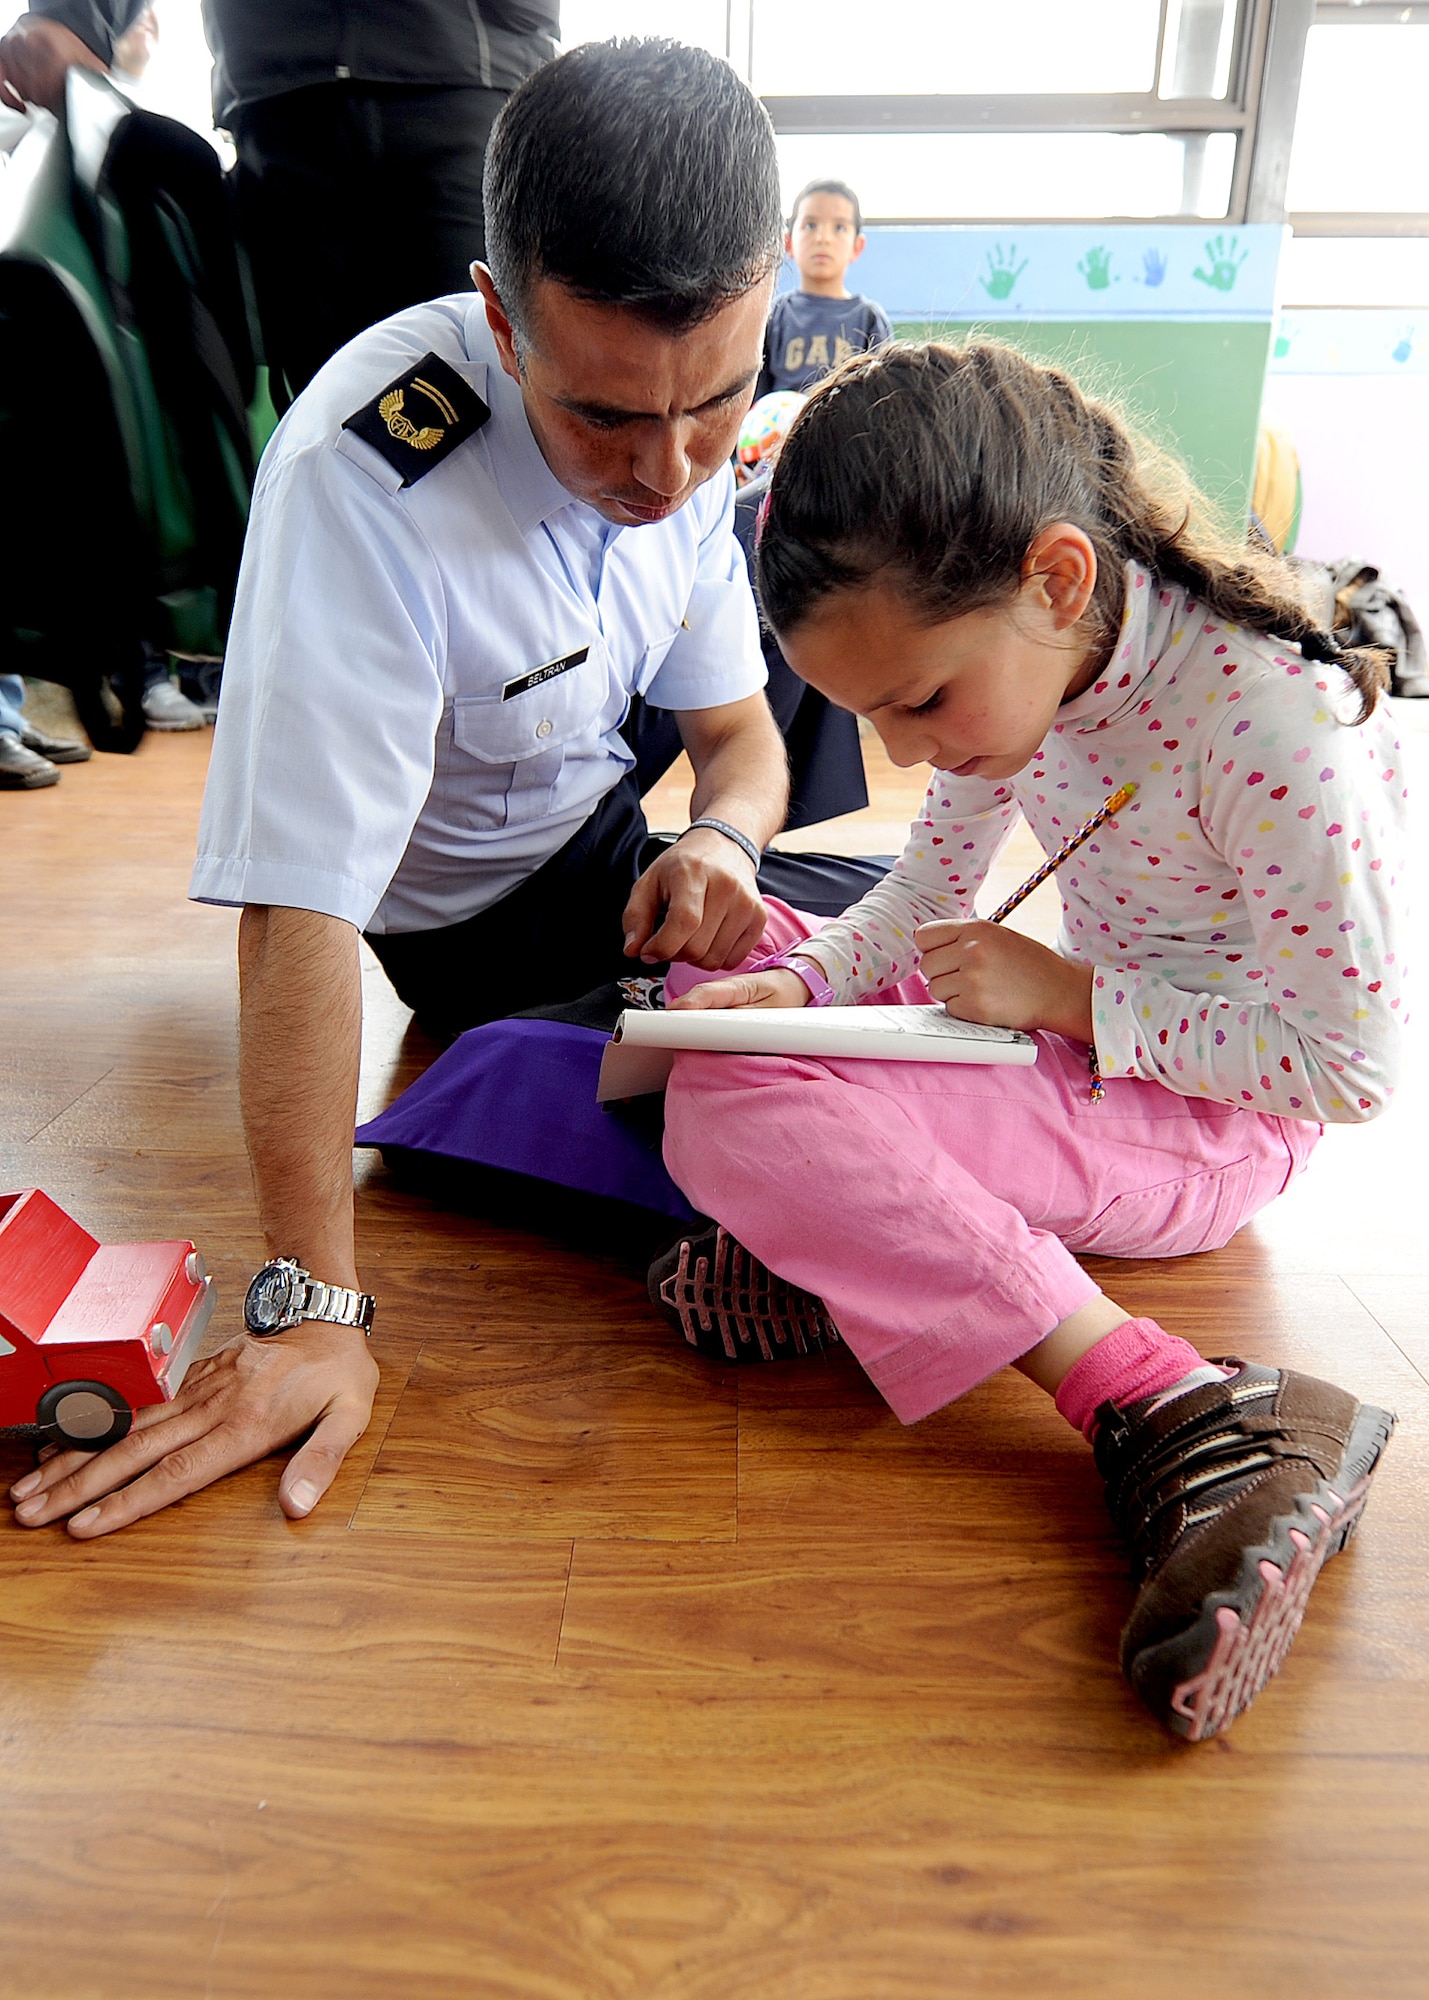 A member of the Colombian air force spends time with a child from Asociación Amigos del Niño Ayudame, Bogota, Colombia how to put together a paper-model helicopter, as one of the donated items members of the Colombian air force and the 571st Mobility Support Advisory Squadron handed out during their visit to the orphanage June 9.  Airmen from both the Inter-American Air Forces Academy and 12th Air Force (Air Forces Southern) also participated in the visit.  (U.S. Air Force photo by Tech. Sgt. Lesley Waters)